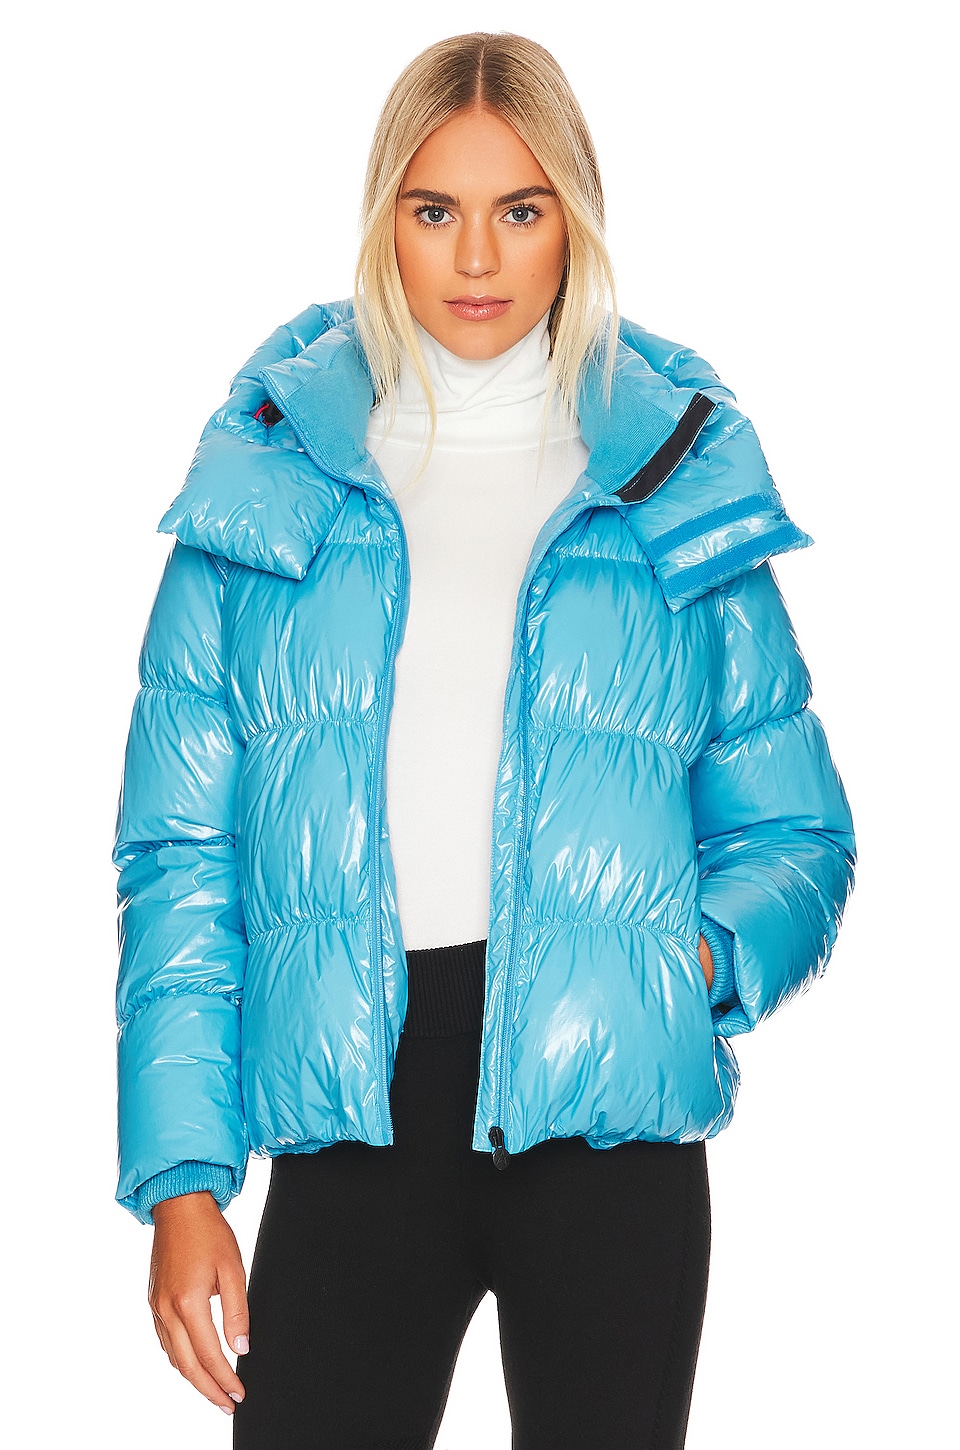 Perfect Moment January Duvet Jacket in Sky Blue